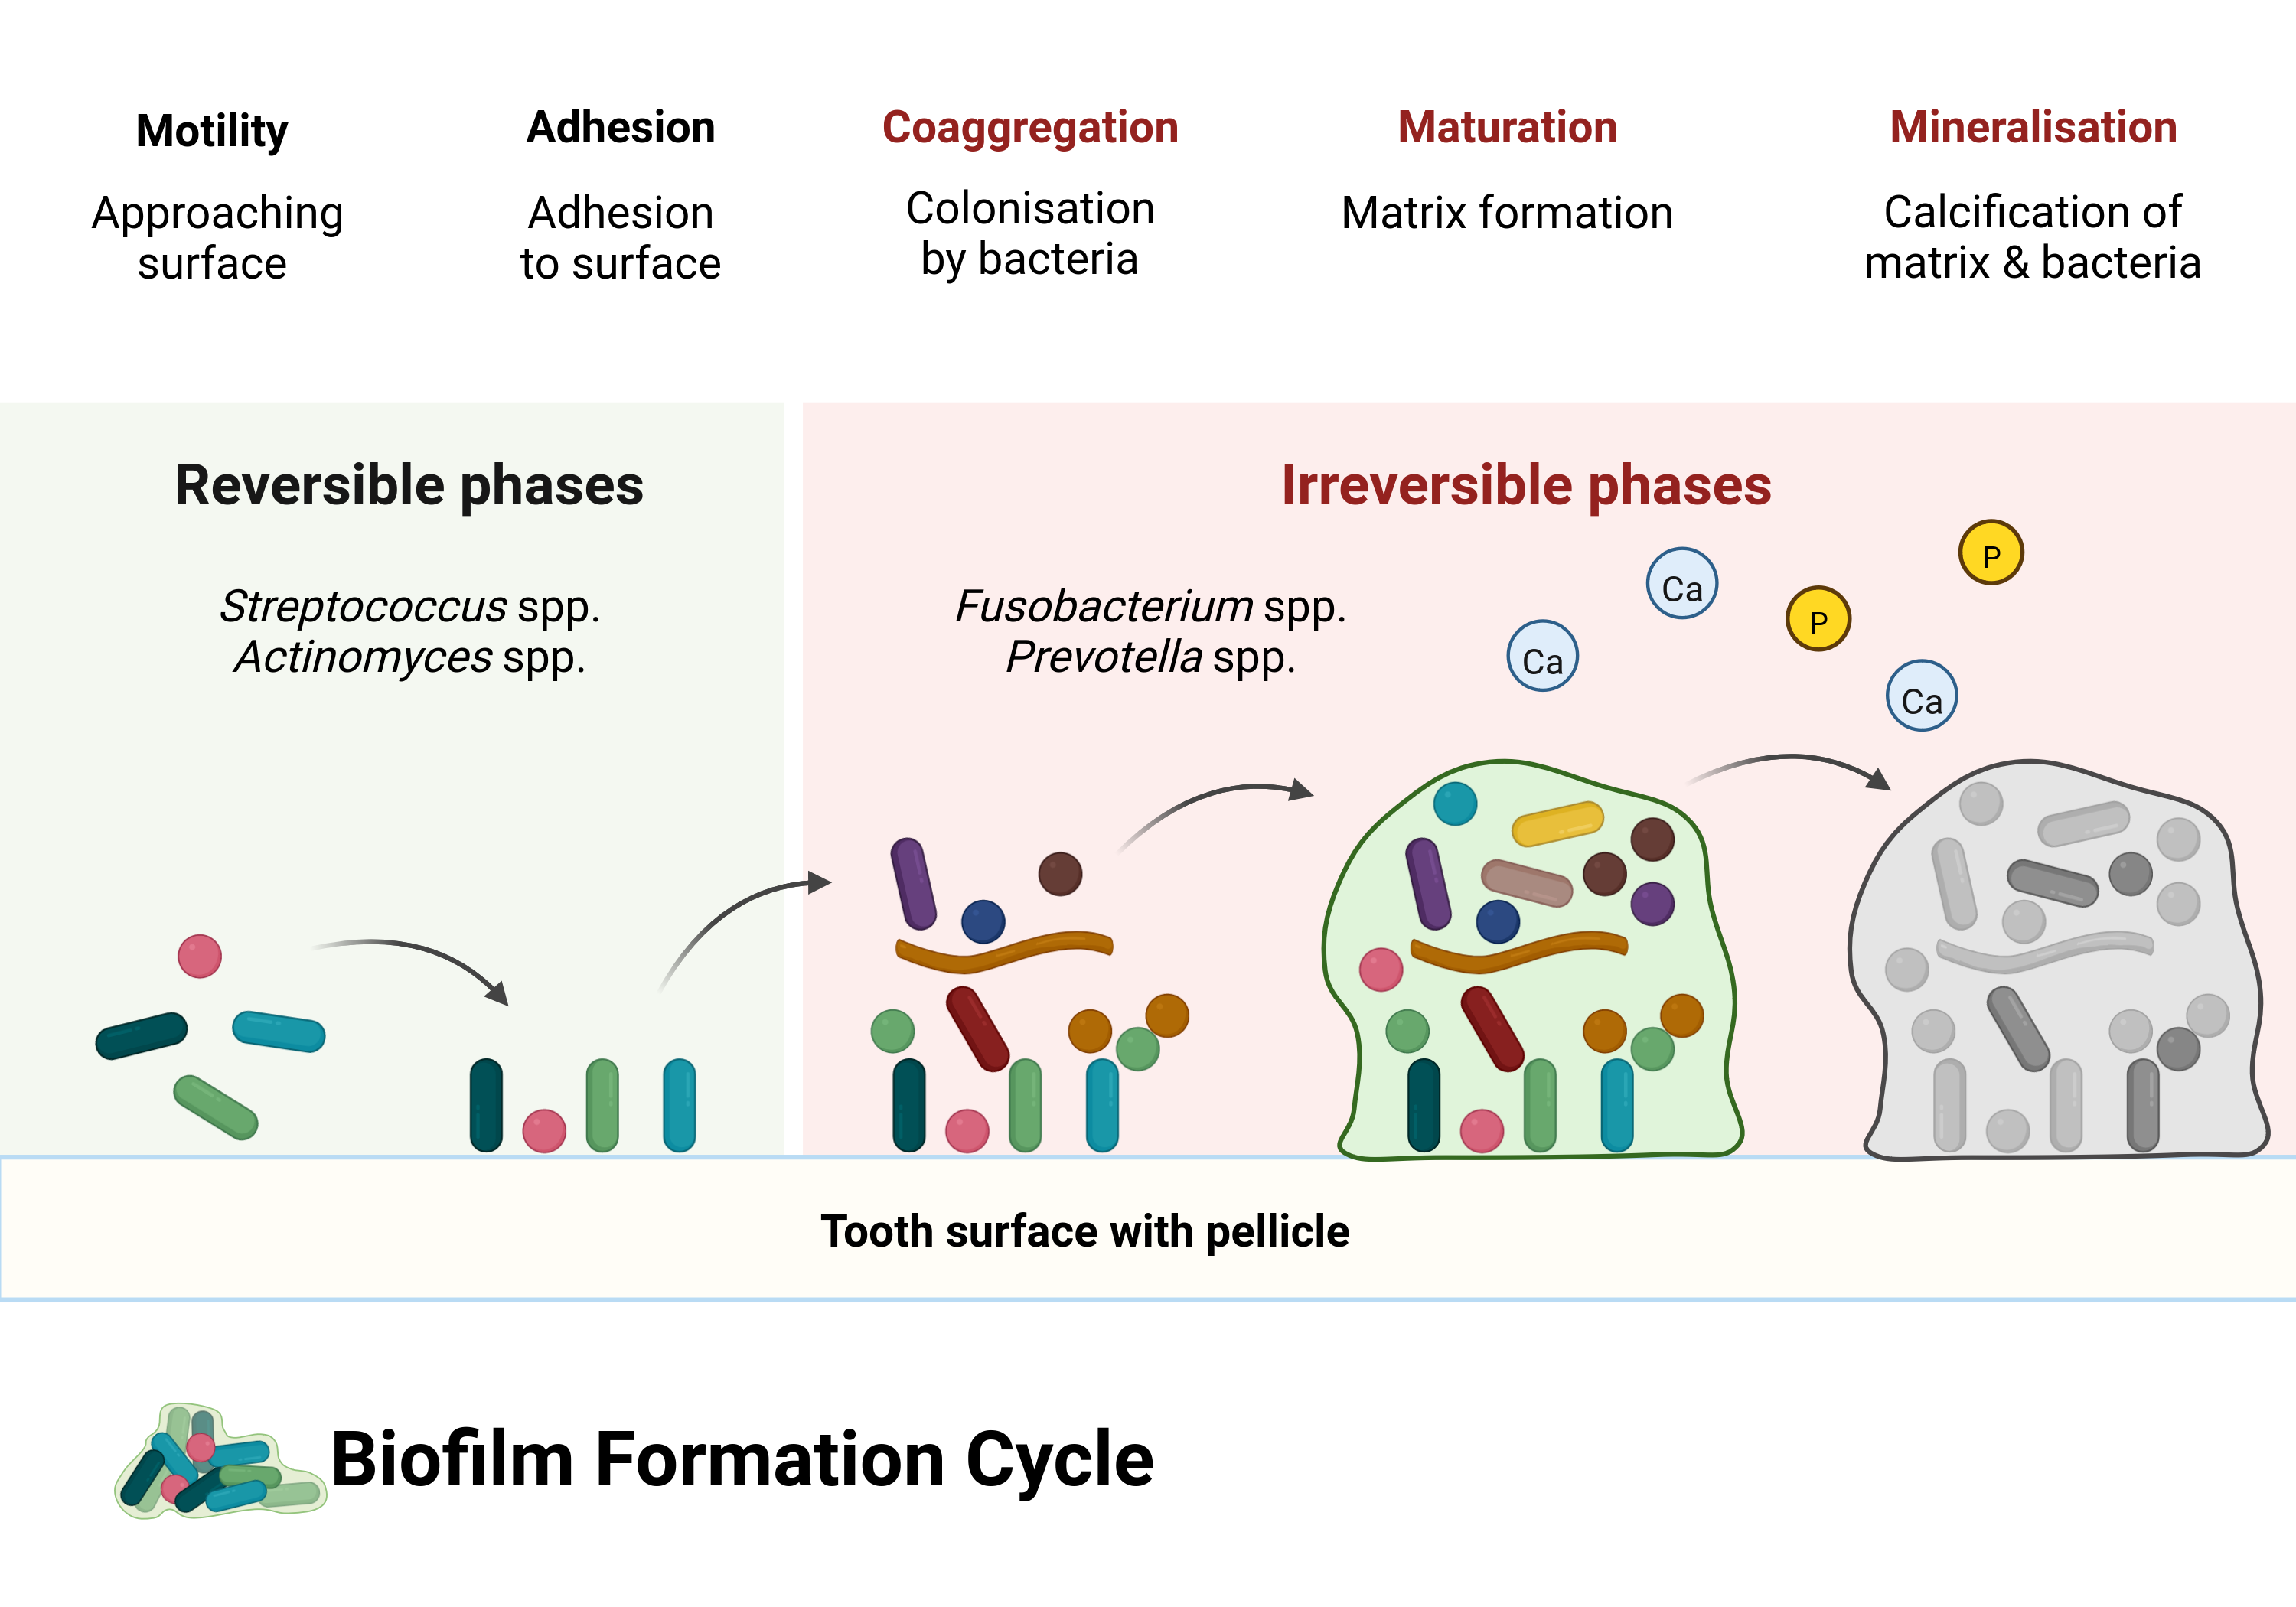 Overview of biofilm formation progressing through multiple stages, including motility, adhesion, coaggregation, maturation, and mineralisation.